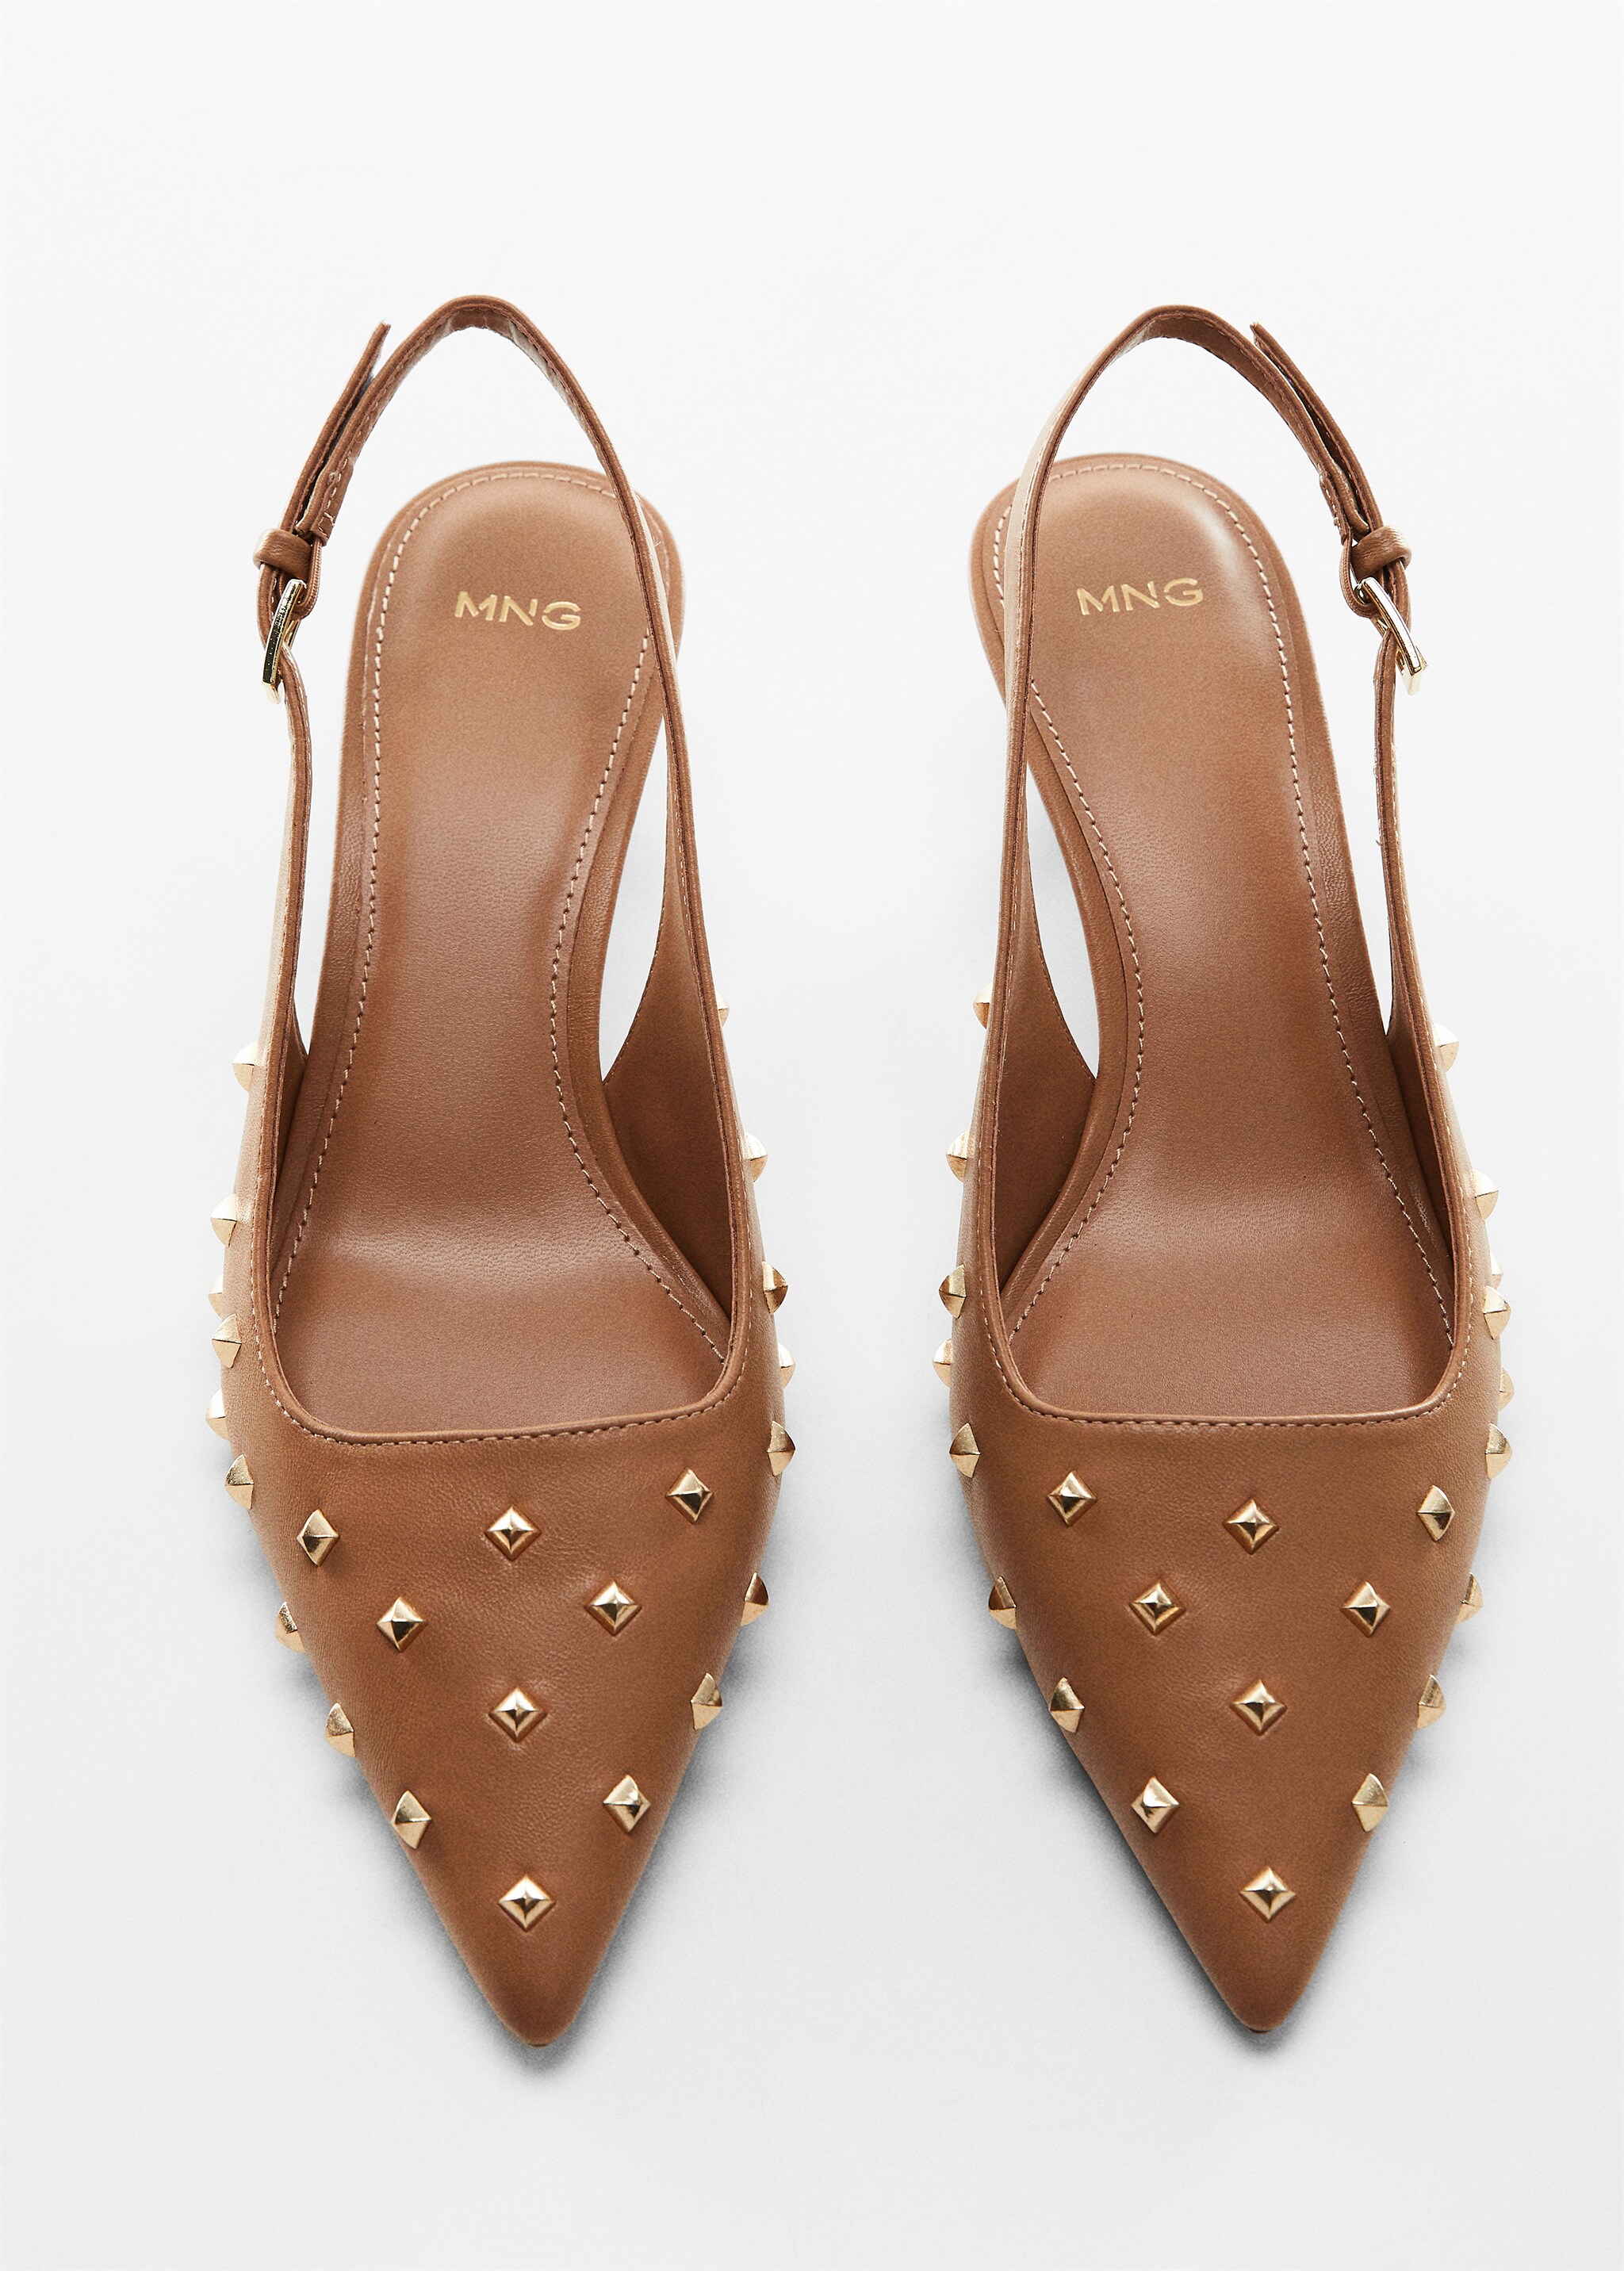 Studded slingback shoes - Details of the article 5